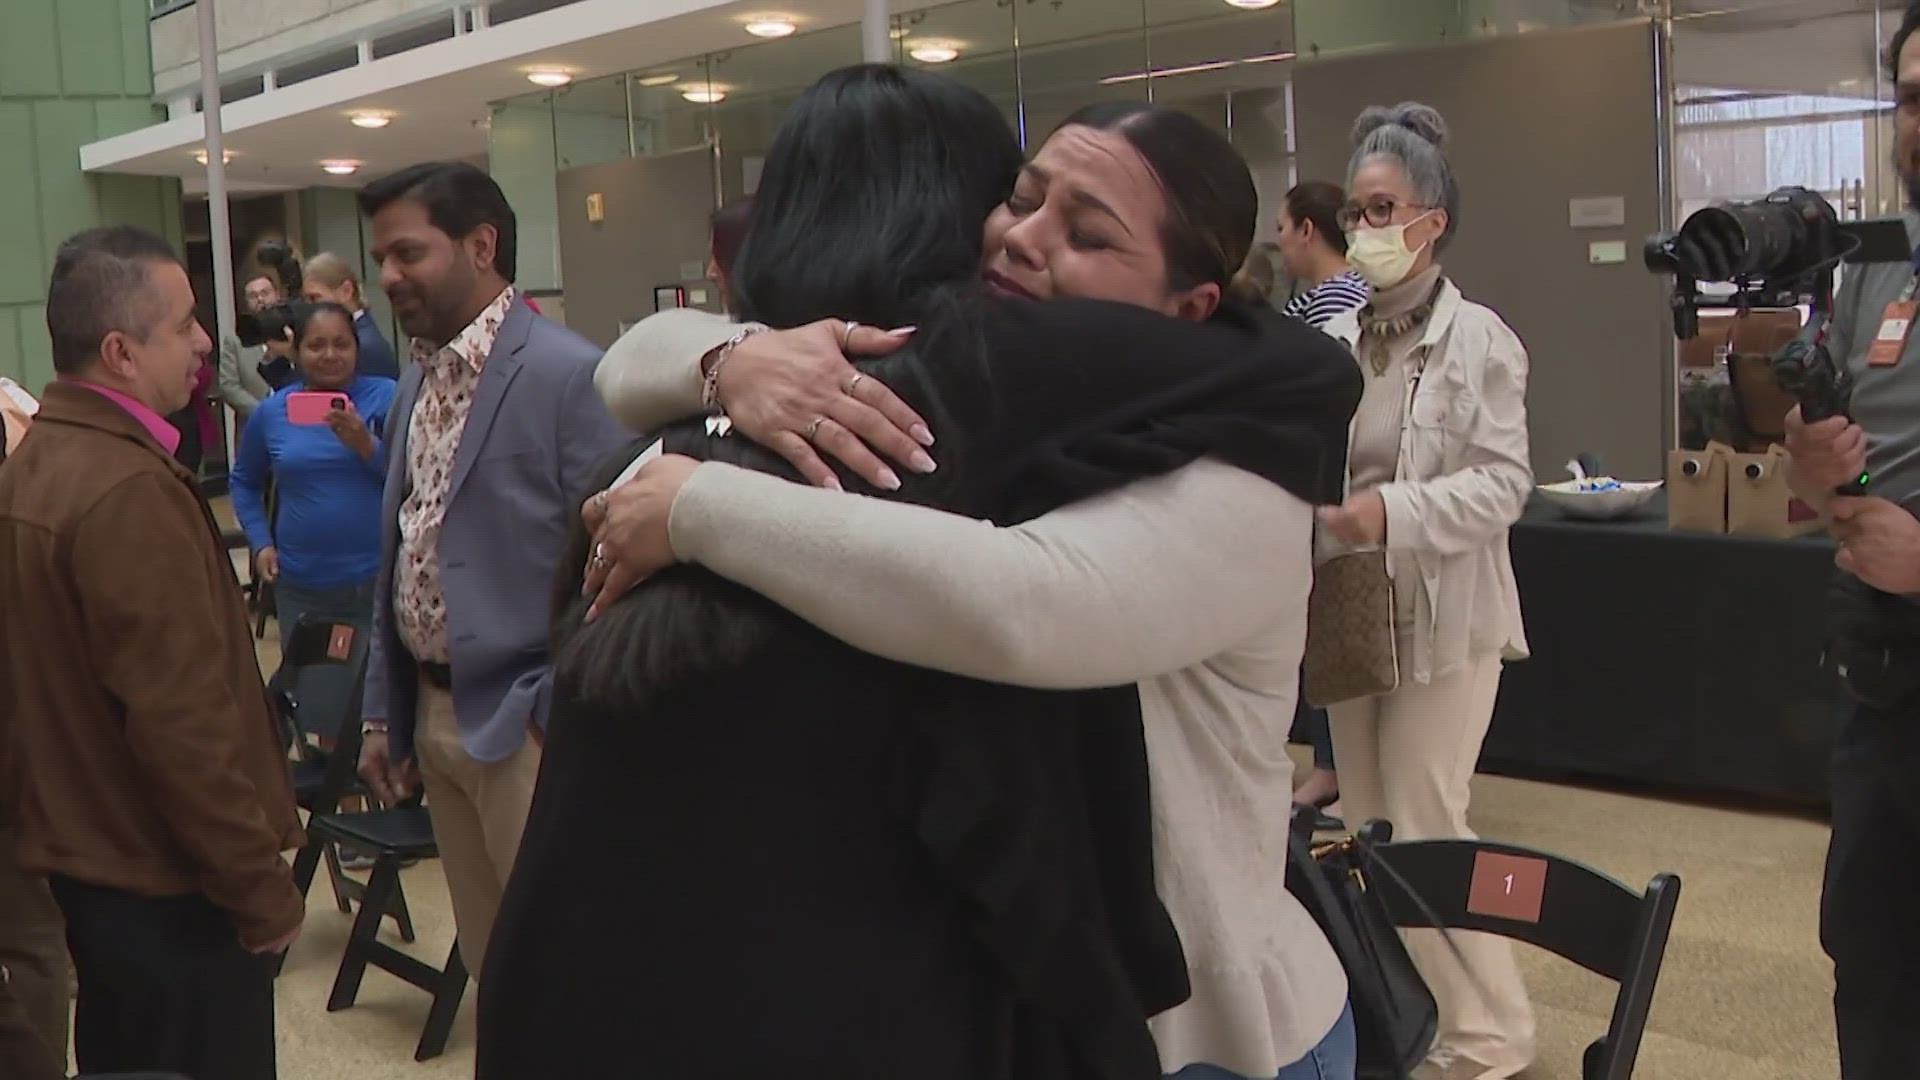 Six kidney donors and six recipients who are part of an organ swap program at UTHealth met for the first time ever on Wednesday and it was an emotional time for all.